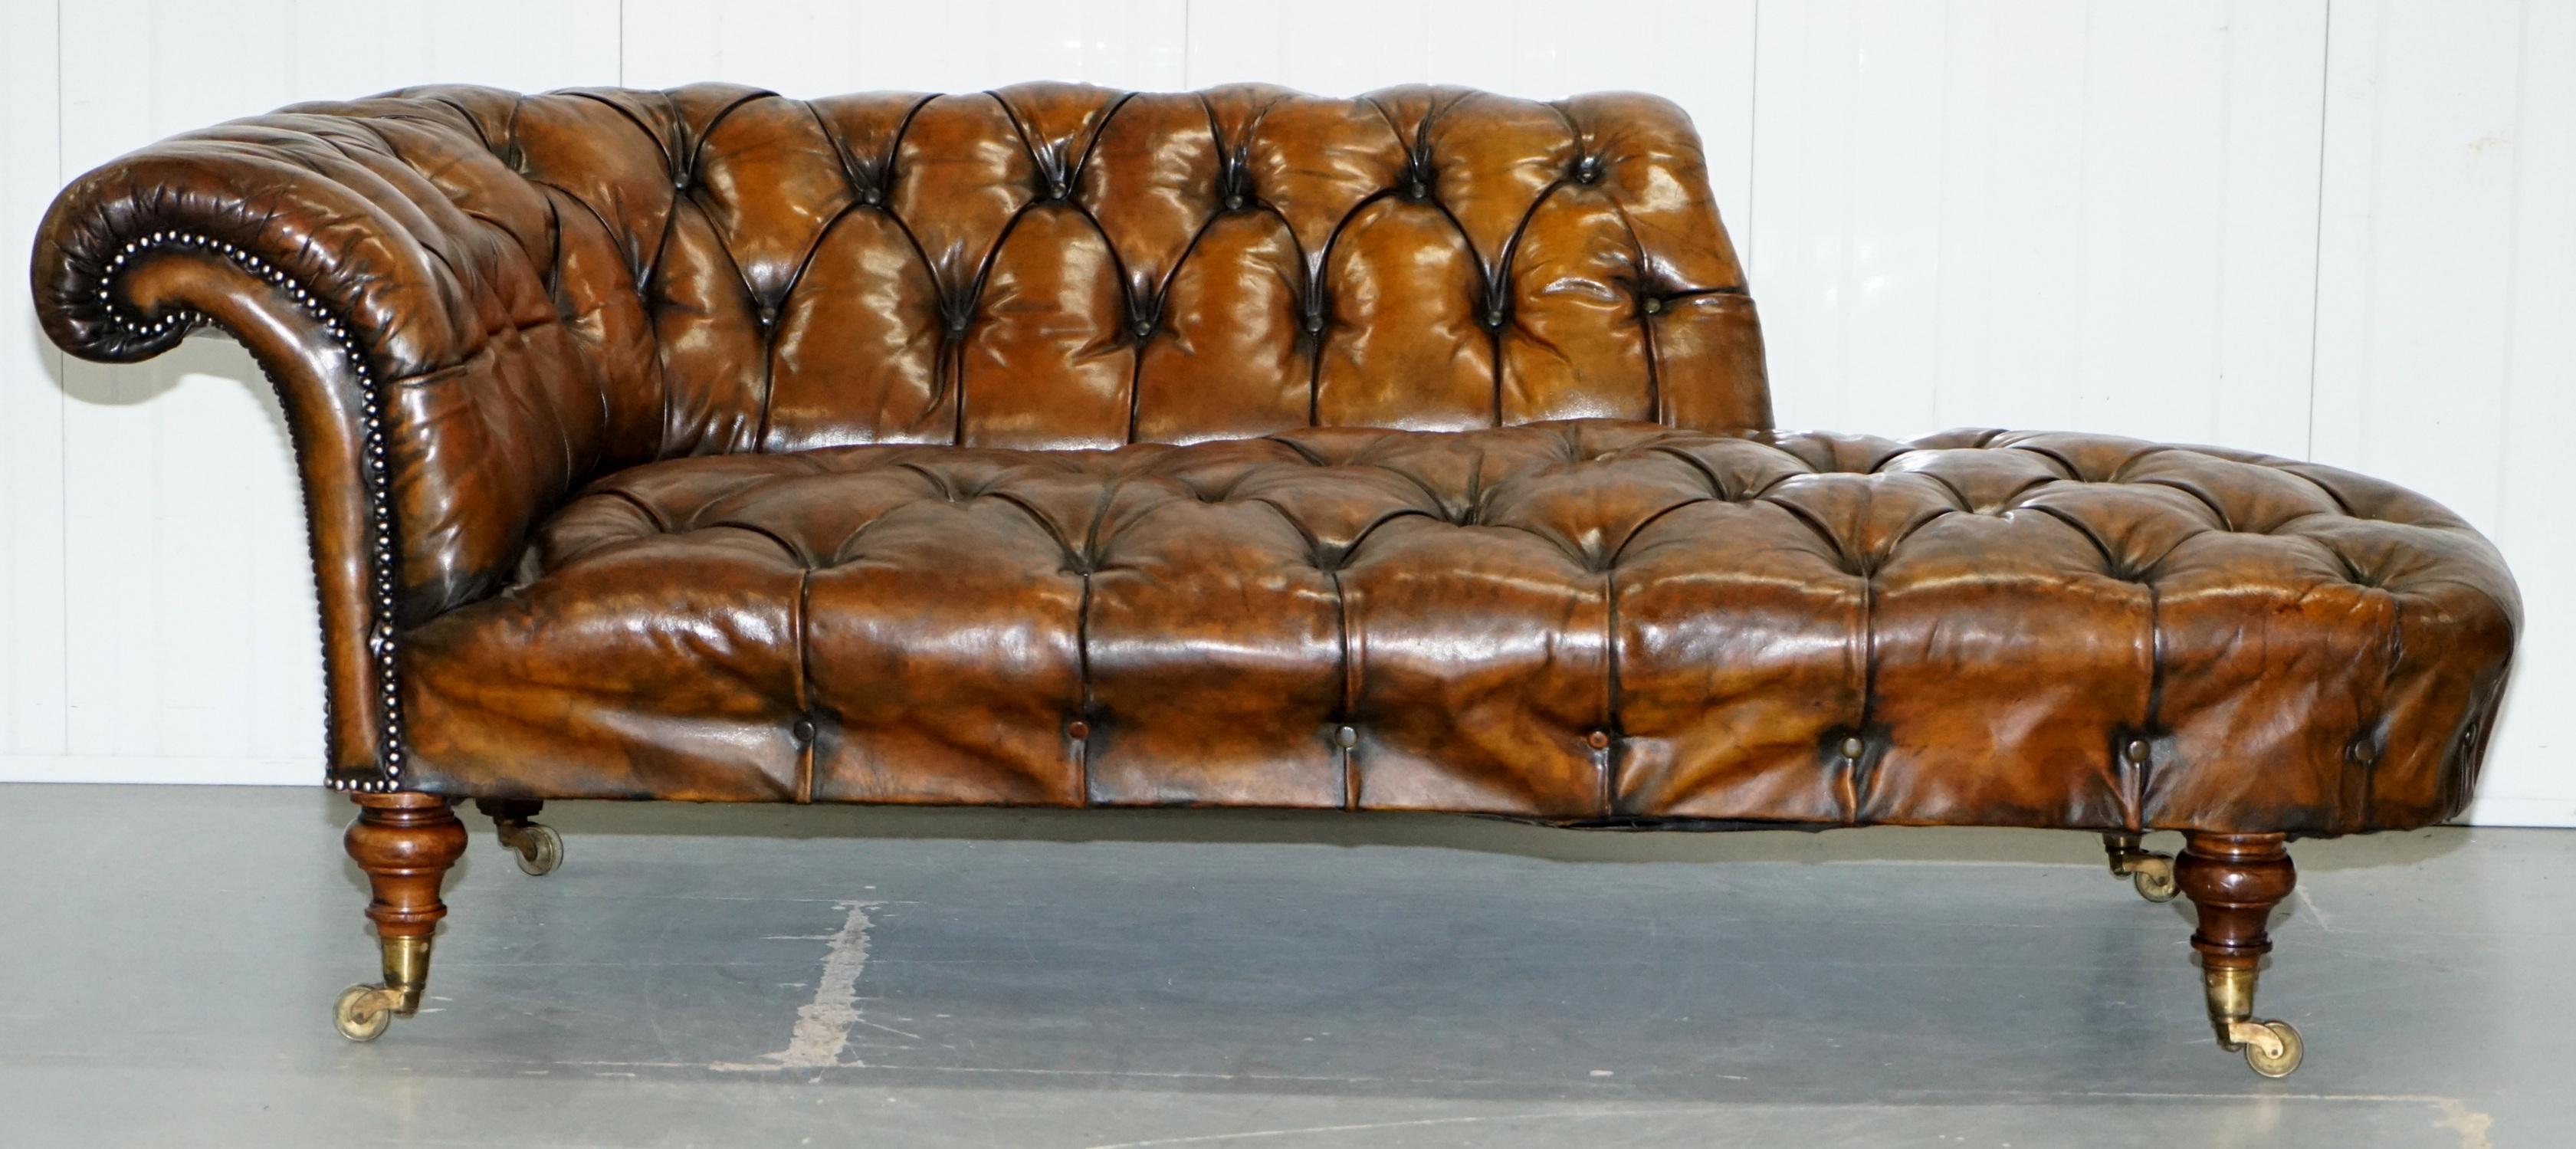 We are delighted to offer for sale this very rare totally original Victorian Howard & Son’s Chesterfield Chesterbed chaise lounge

An amazing find, the chaise has been fully restored to include a light staining to the walnut legs, the leather has